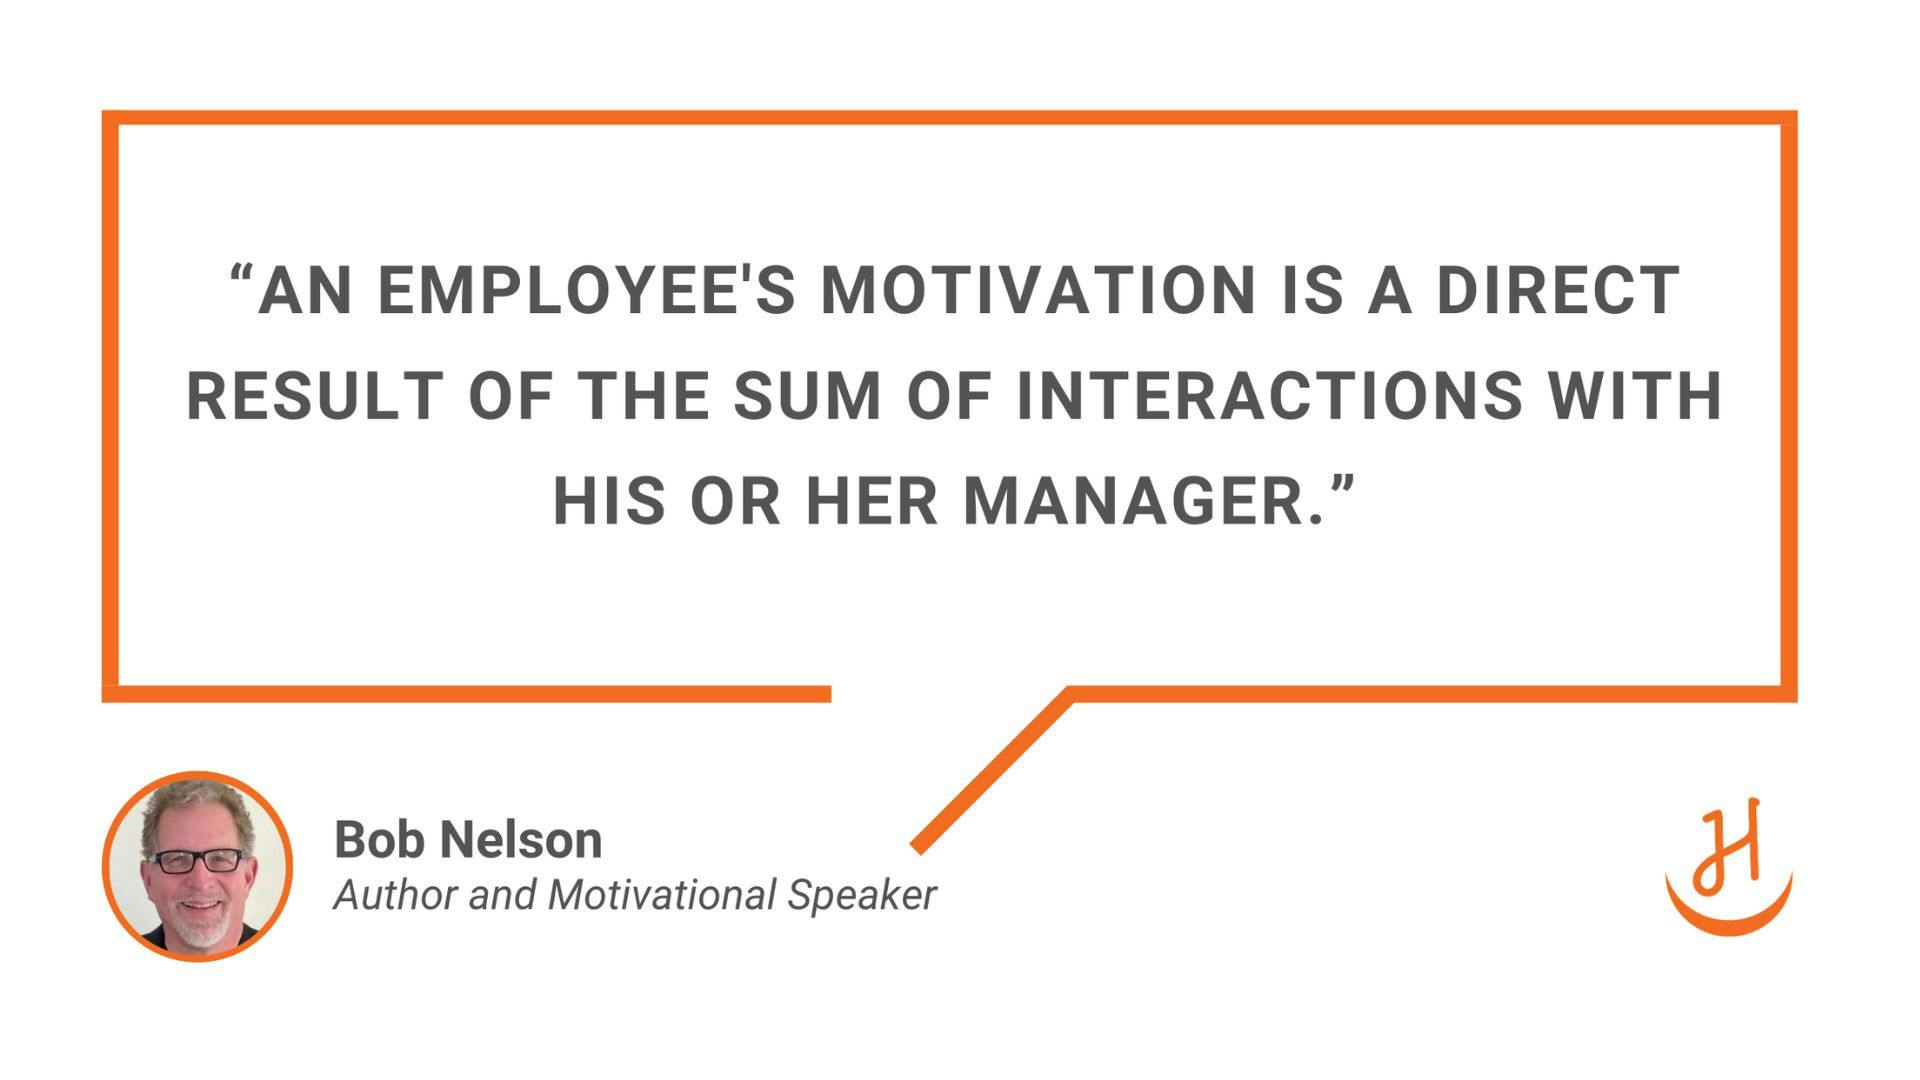  “An employee's motivation is a direct result of the sum of interactions with his or her manager.” Quote by Bob Nelson, Author and Motivational Speaker.